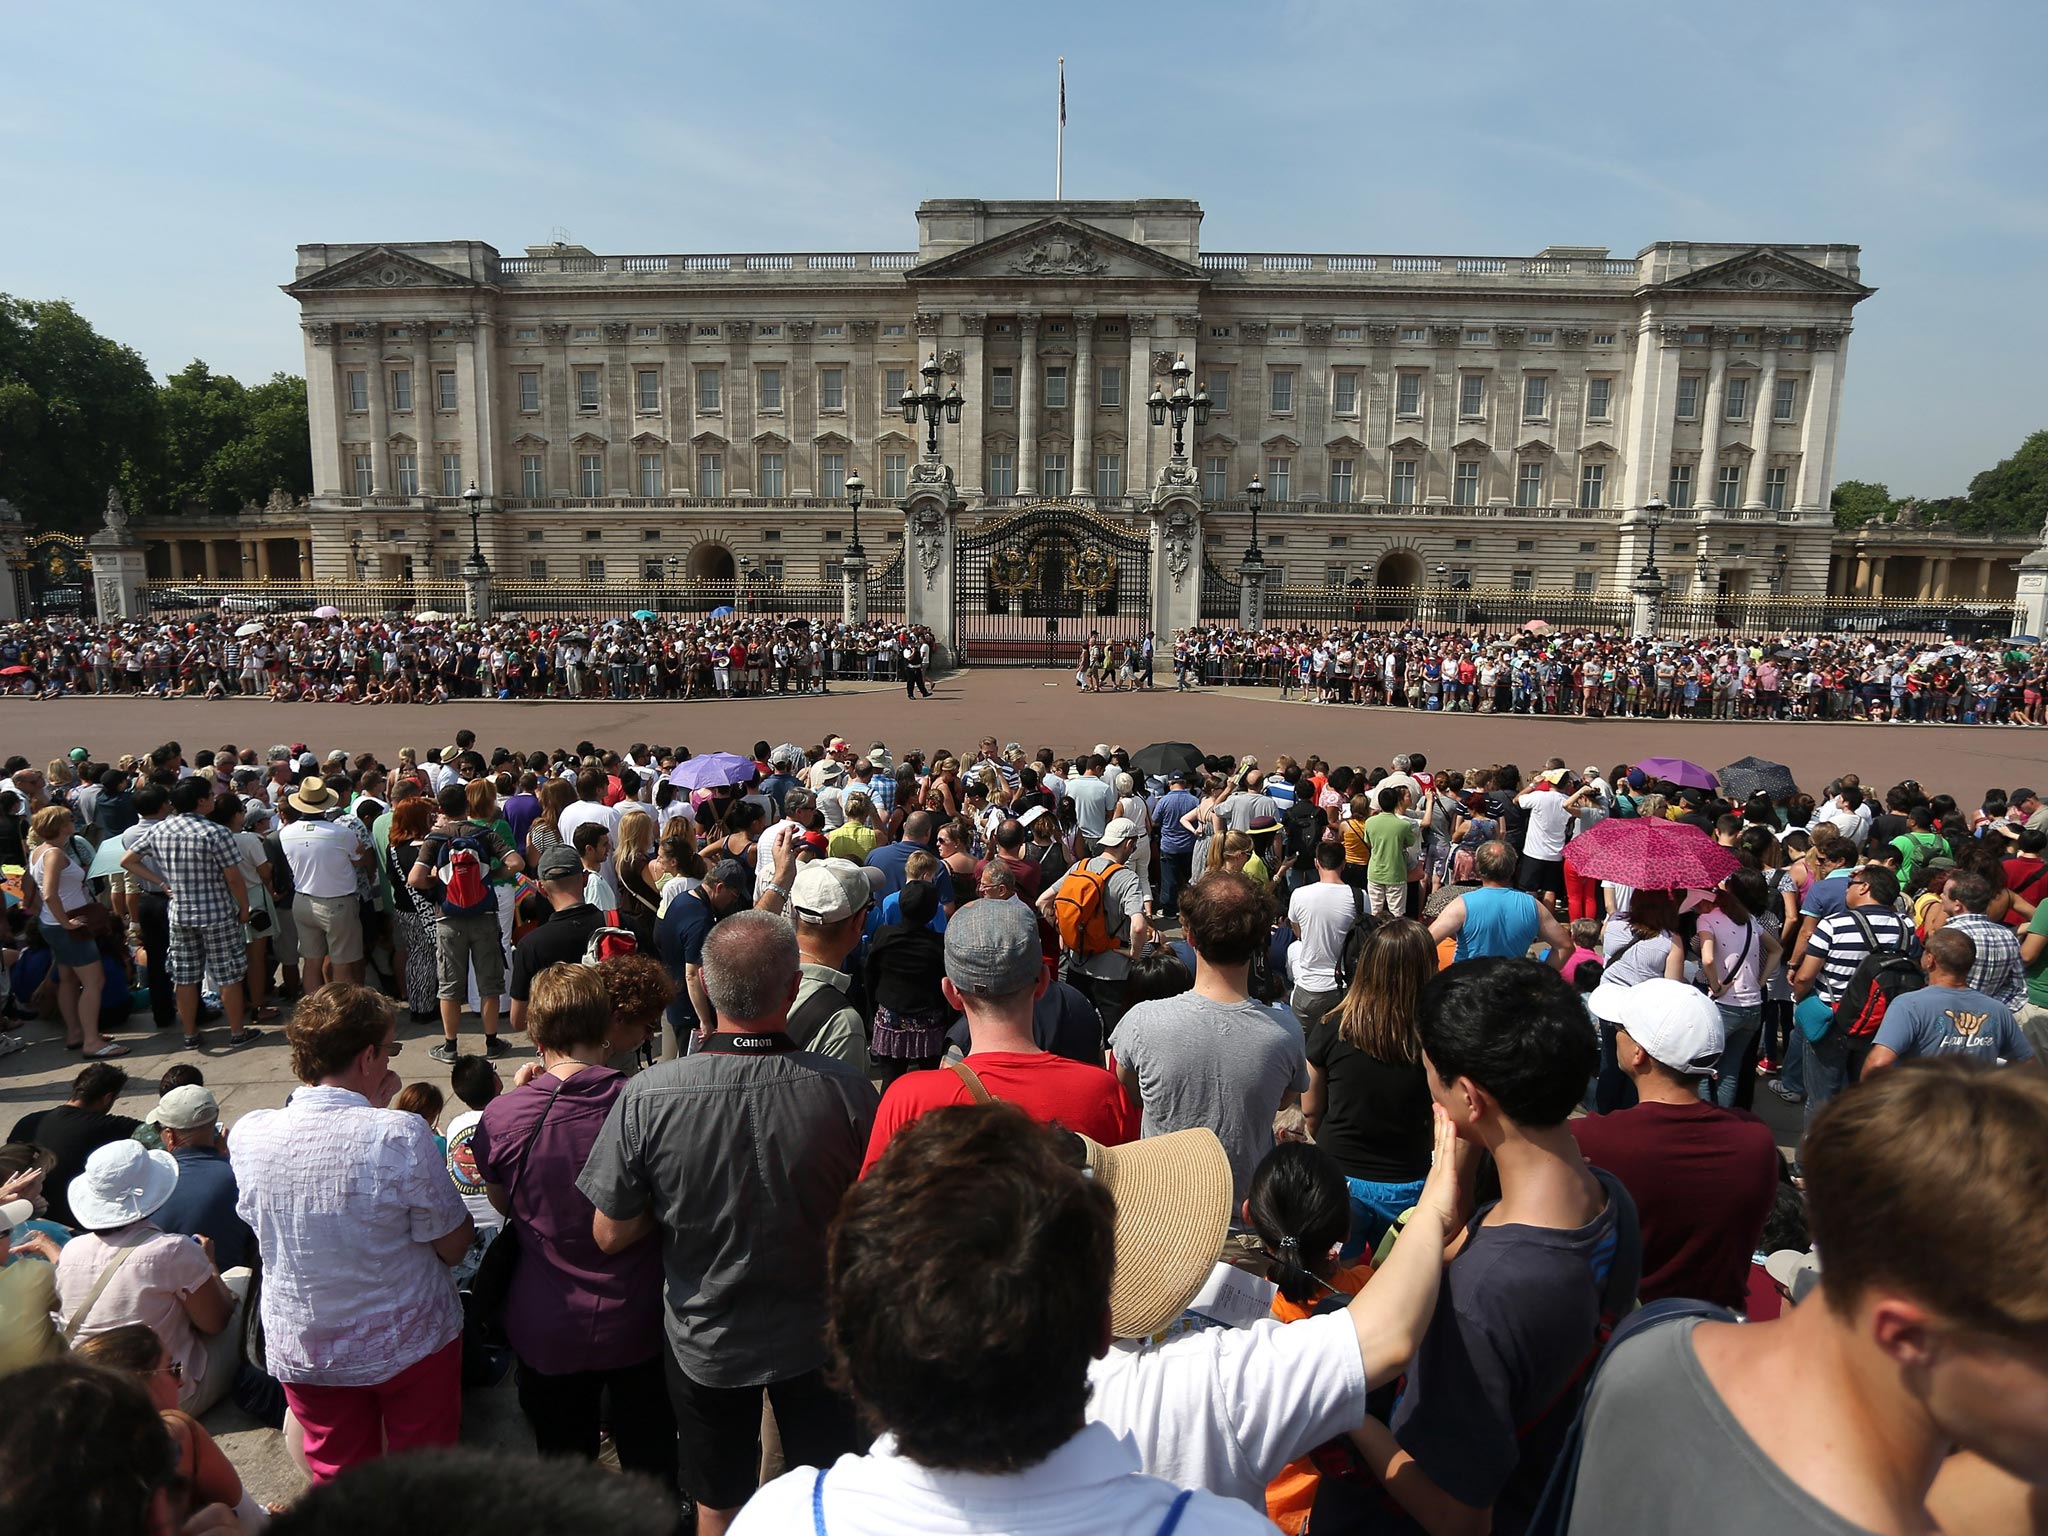 Crowds gathered at Buckingham Palace by mid-morning